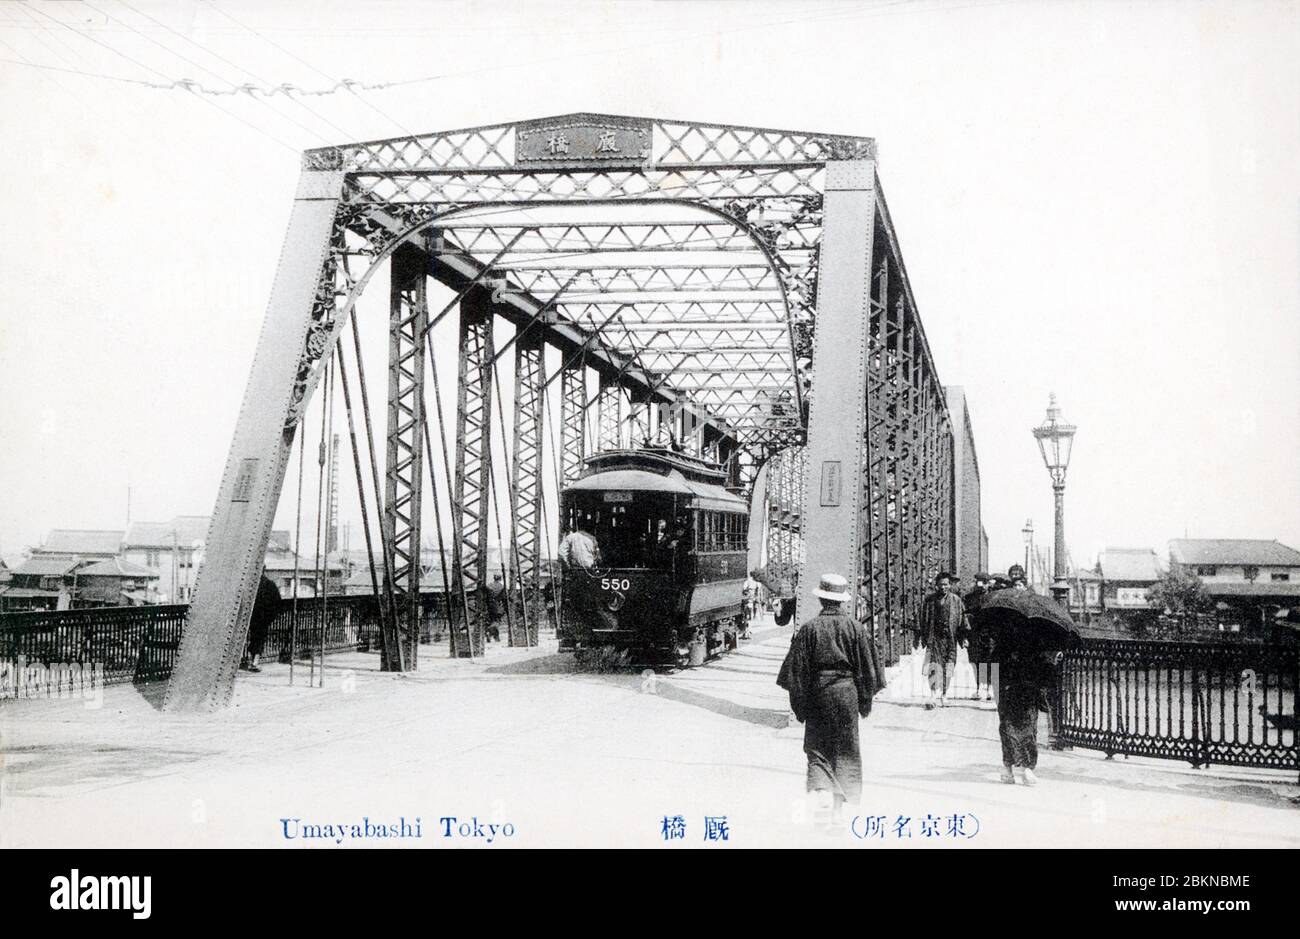 [ 1910s Japan - Steel Bridge across the Sumidagawa River in Tokyo ] —   Umayabashi Bridge across the Sumidagawa River in Tokyo. The steel bridge was completed in May 1893 (Meiji 26). It was badly damaged during the Great Kanto Earthquake (Kanto Daishinsai) of September 1, 1923 (Taisho 12), and replaced soon after.  20th century vintage postcard. Stock Photo